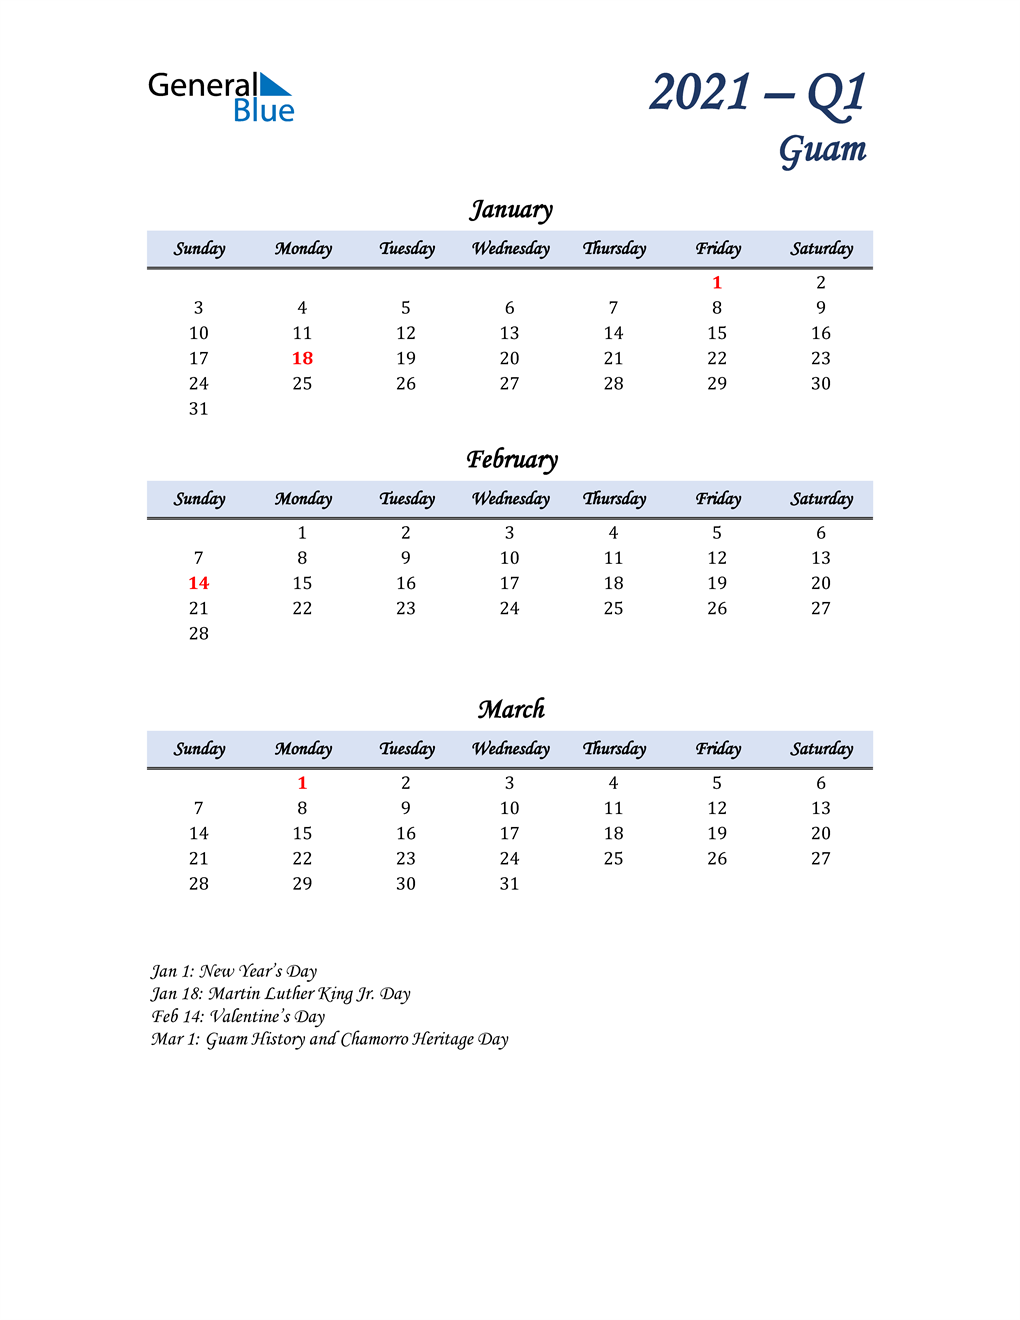  January, February, and March Calendar for Guam